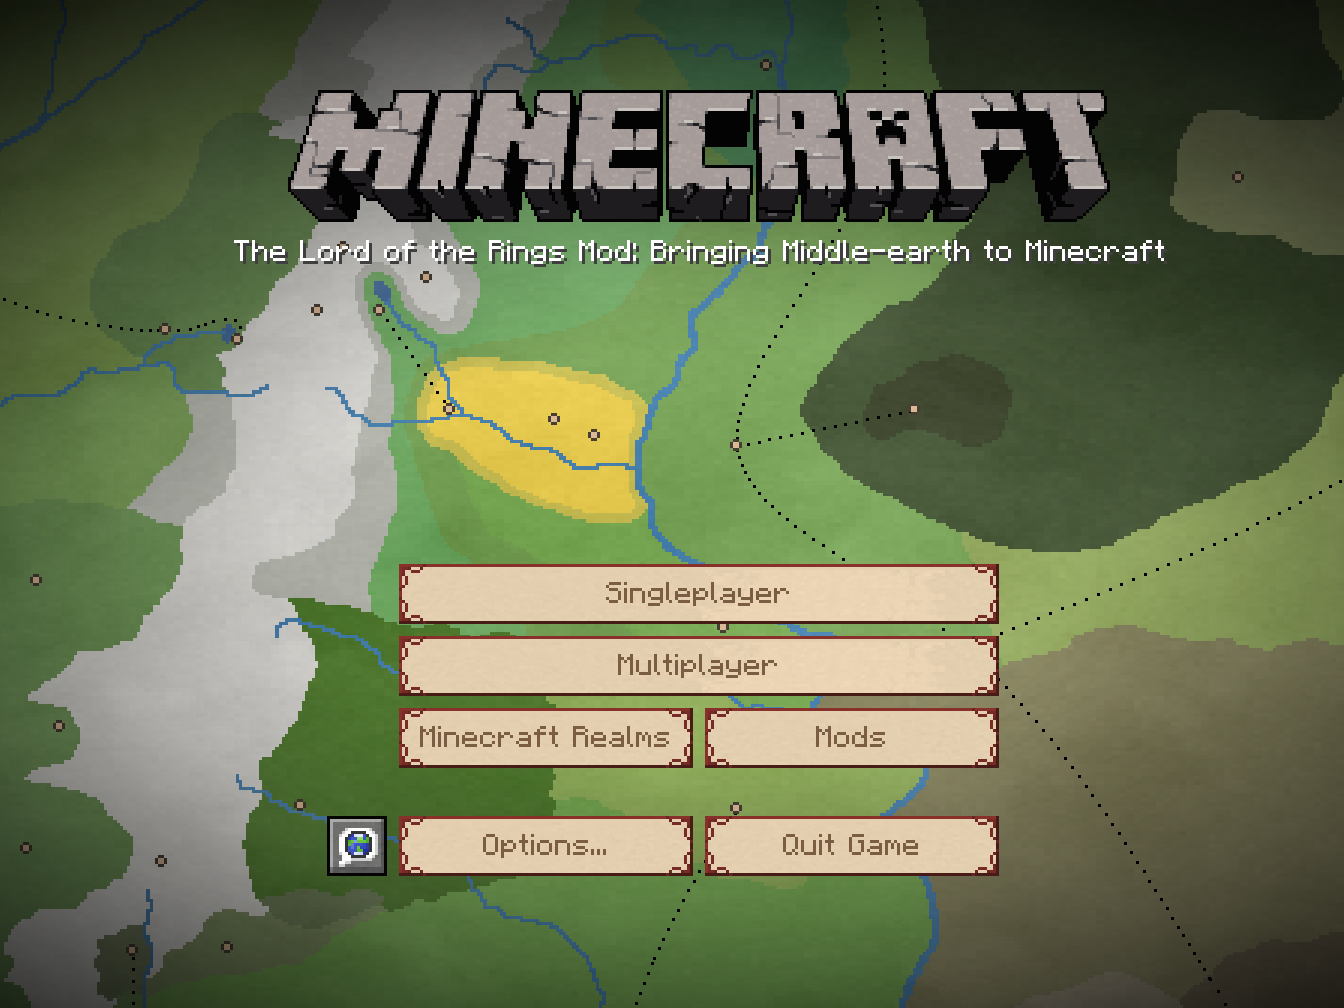 Help Installing The Lord Of The Rings Mod The Lord Of The Rings Minecraft Mod Wiki Fandom